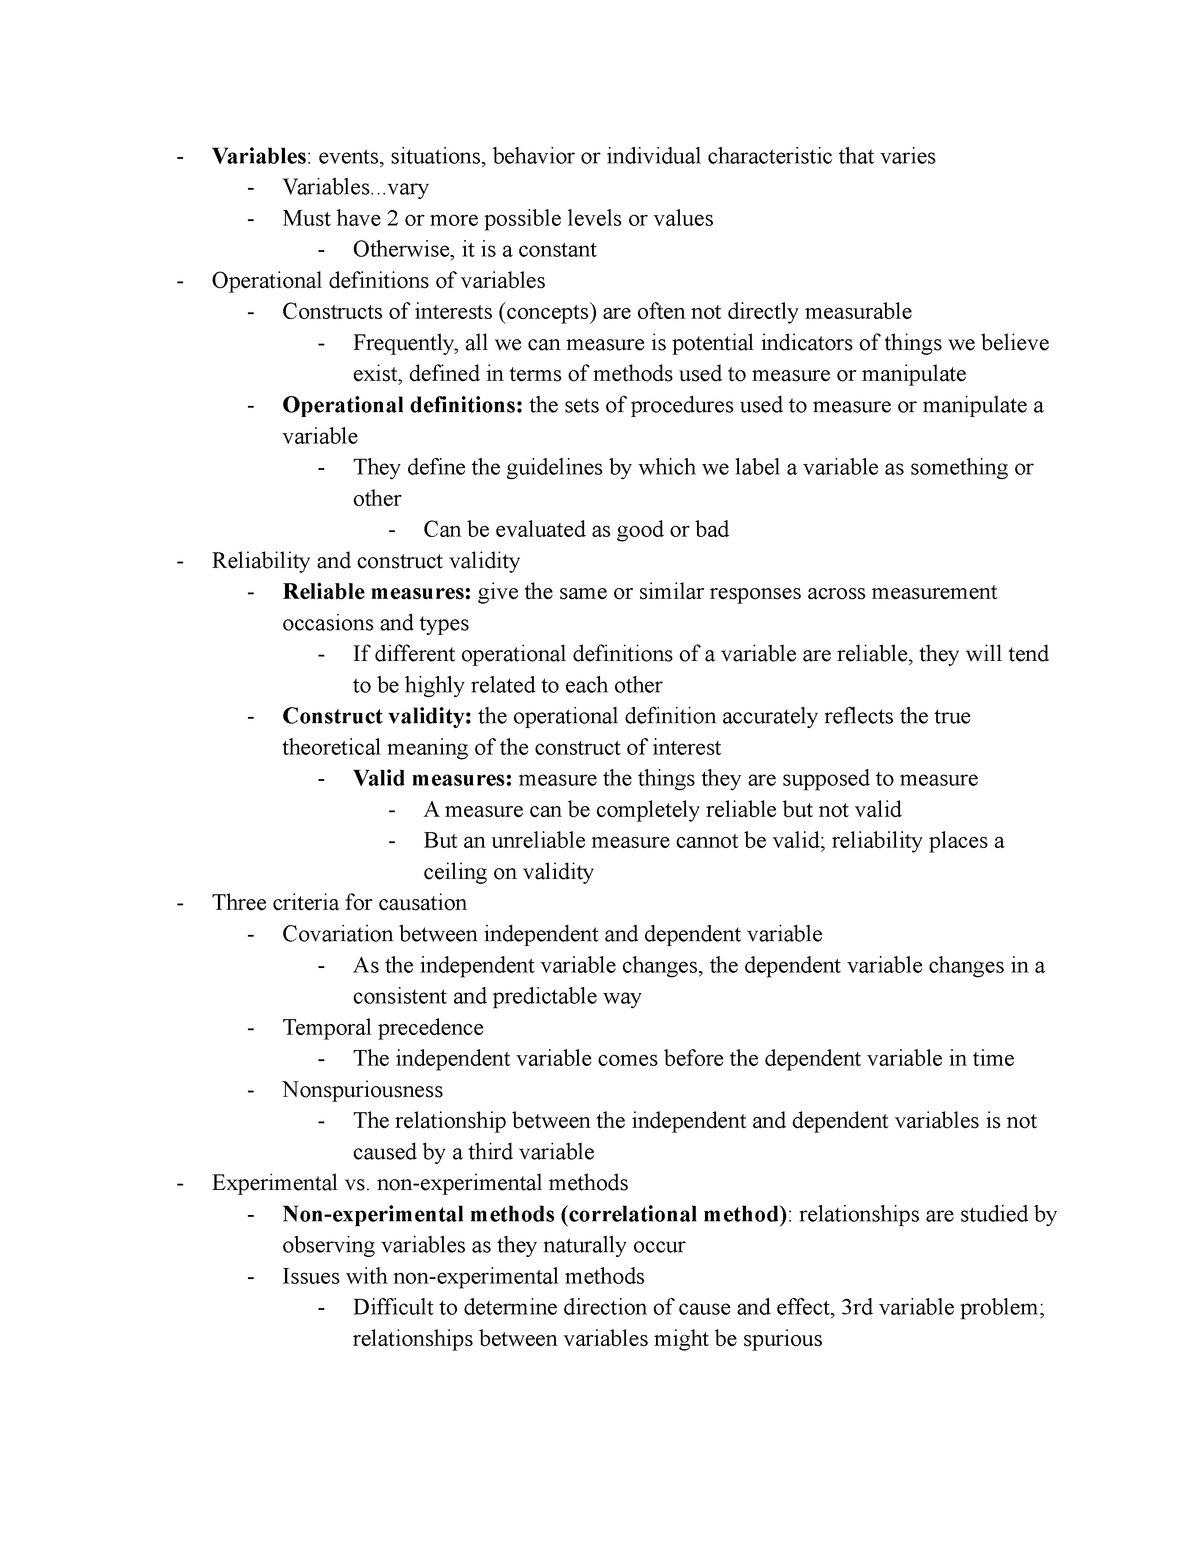 Psyc 332 Chapter 4 Notes From Online Lecture Variables Events Situations Behavior Or 